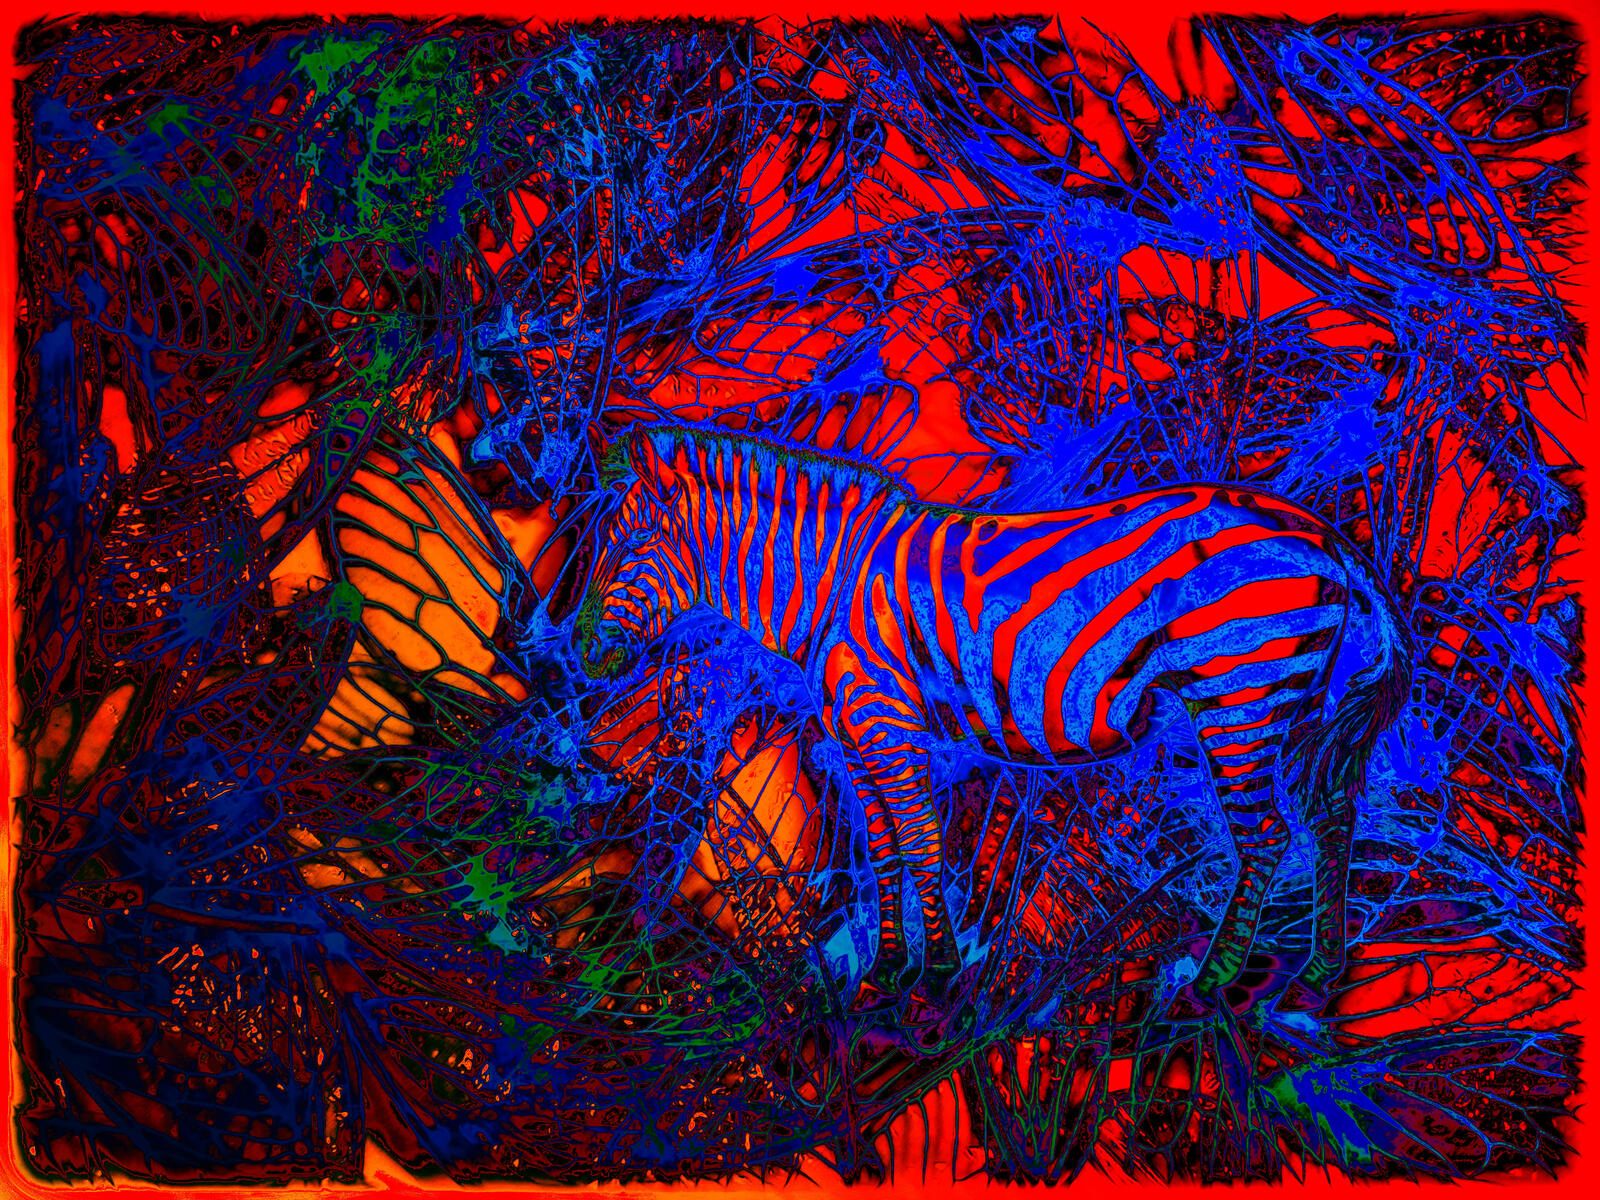 Wallpapers background abstraction zebra on the desktop